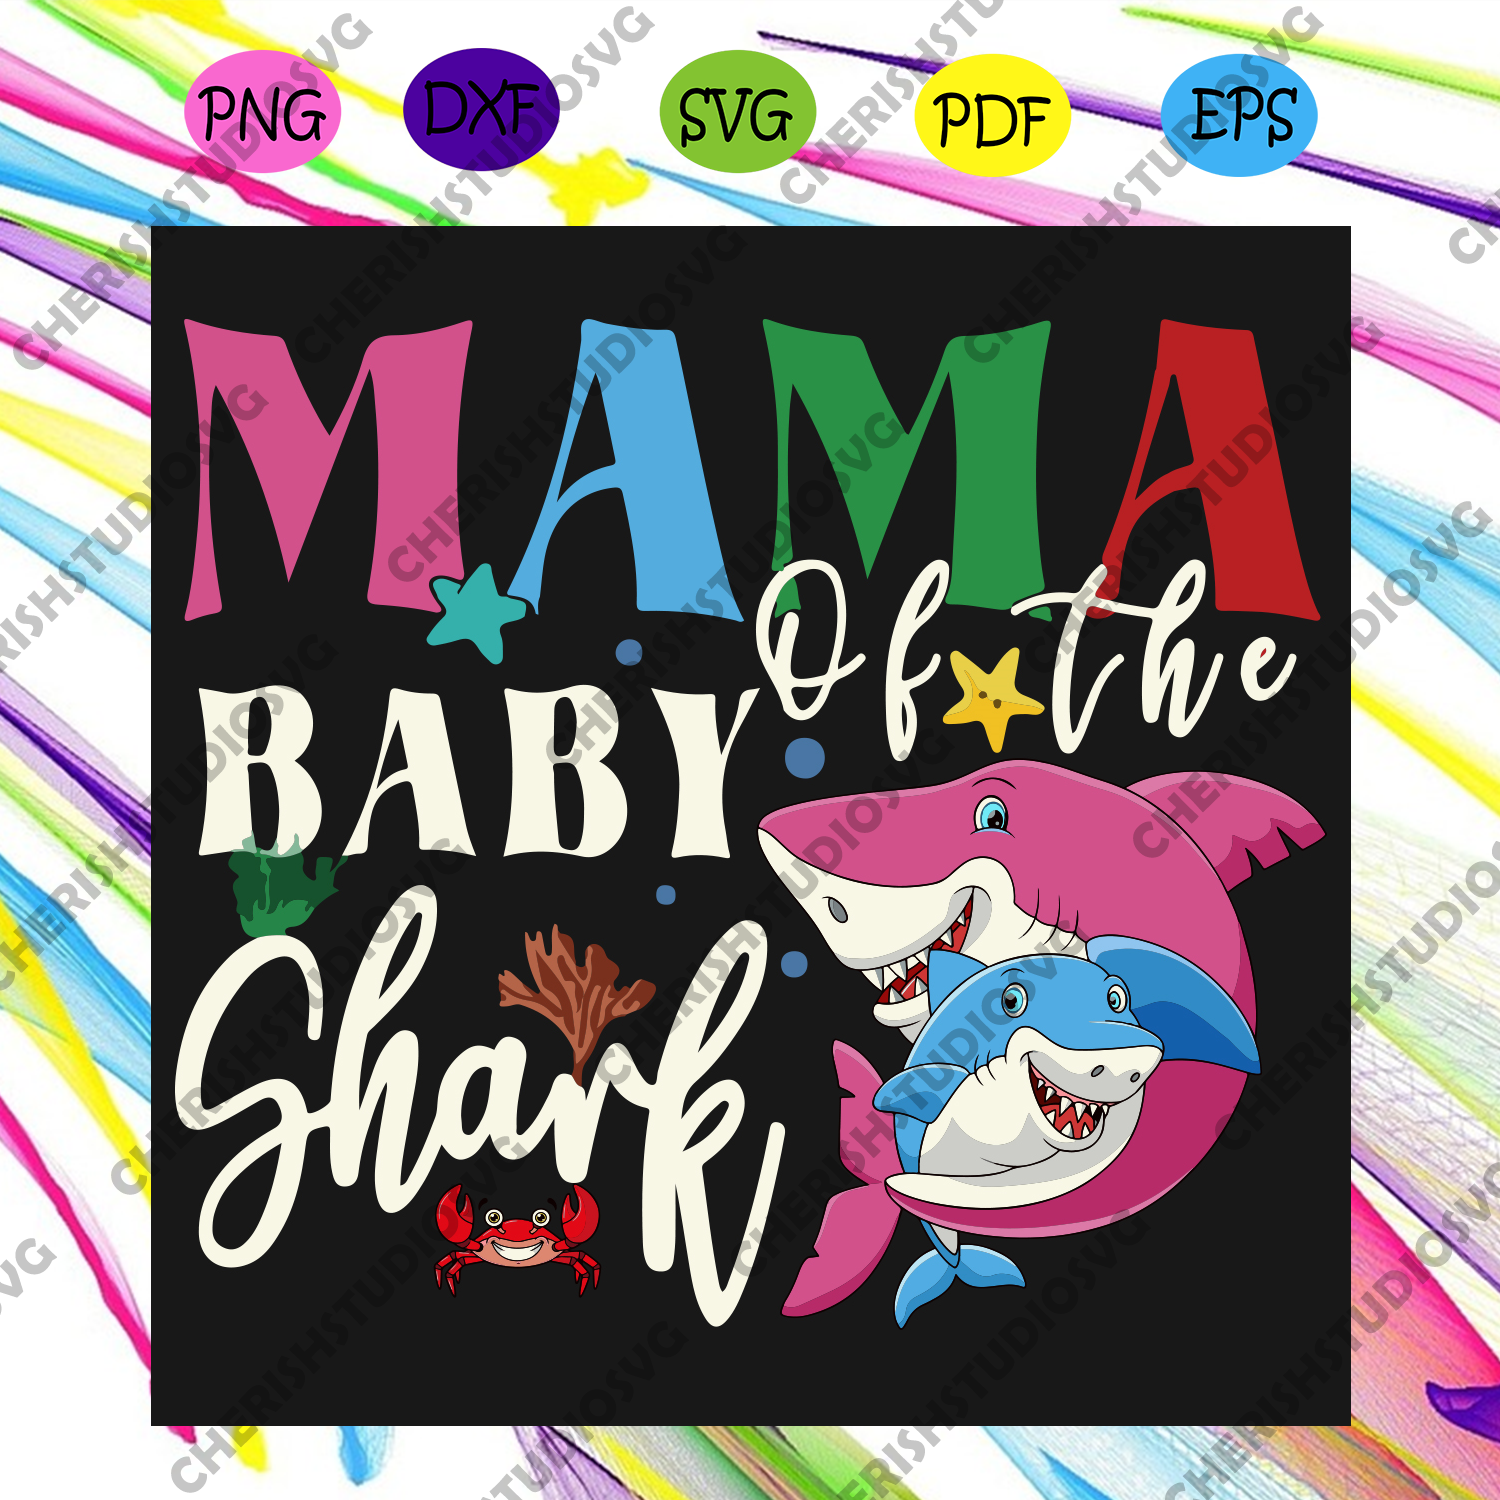 Download Mama Of The Baby Shark Mothers Day Cute Family Svg Mothers Day Svg M Cherishsvgstudio